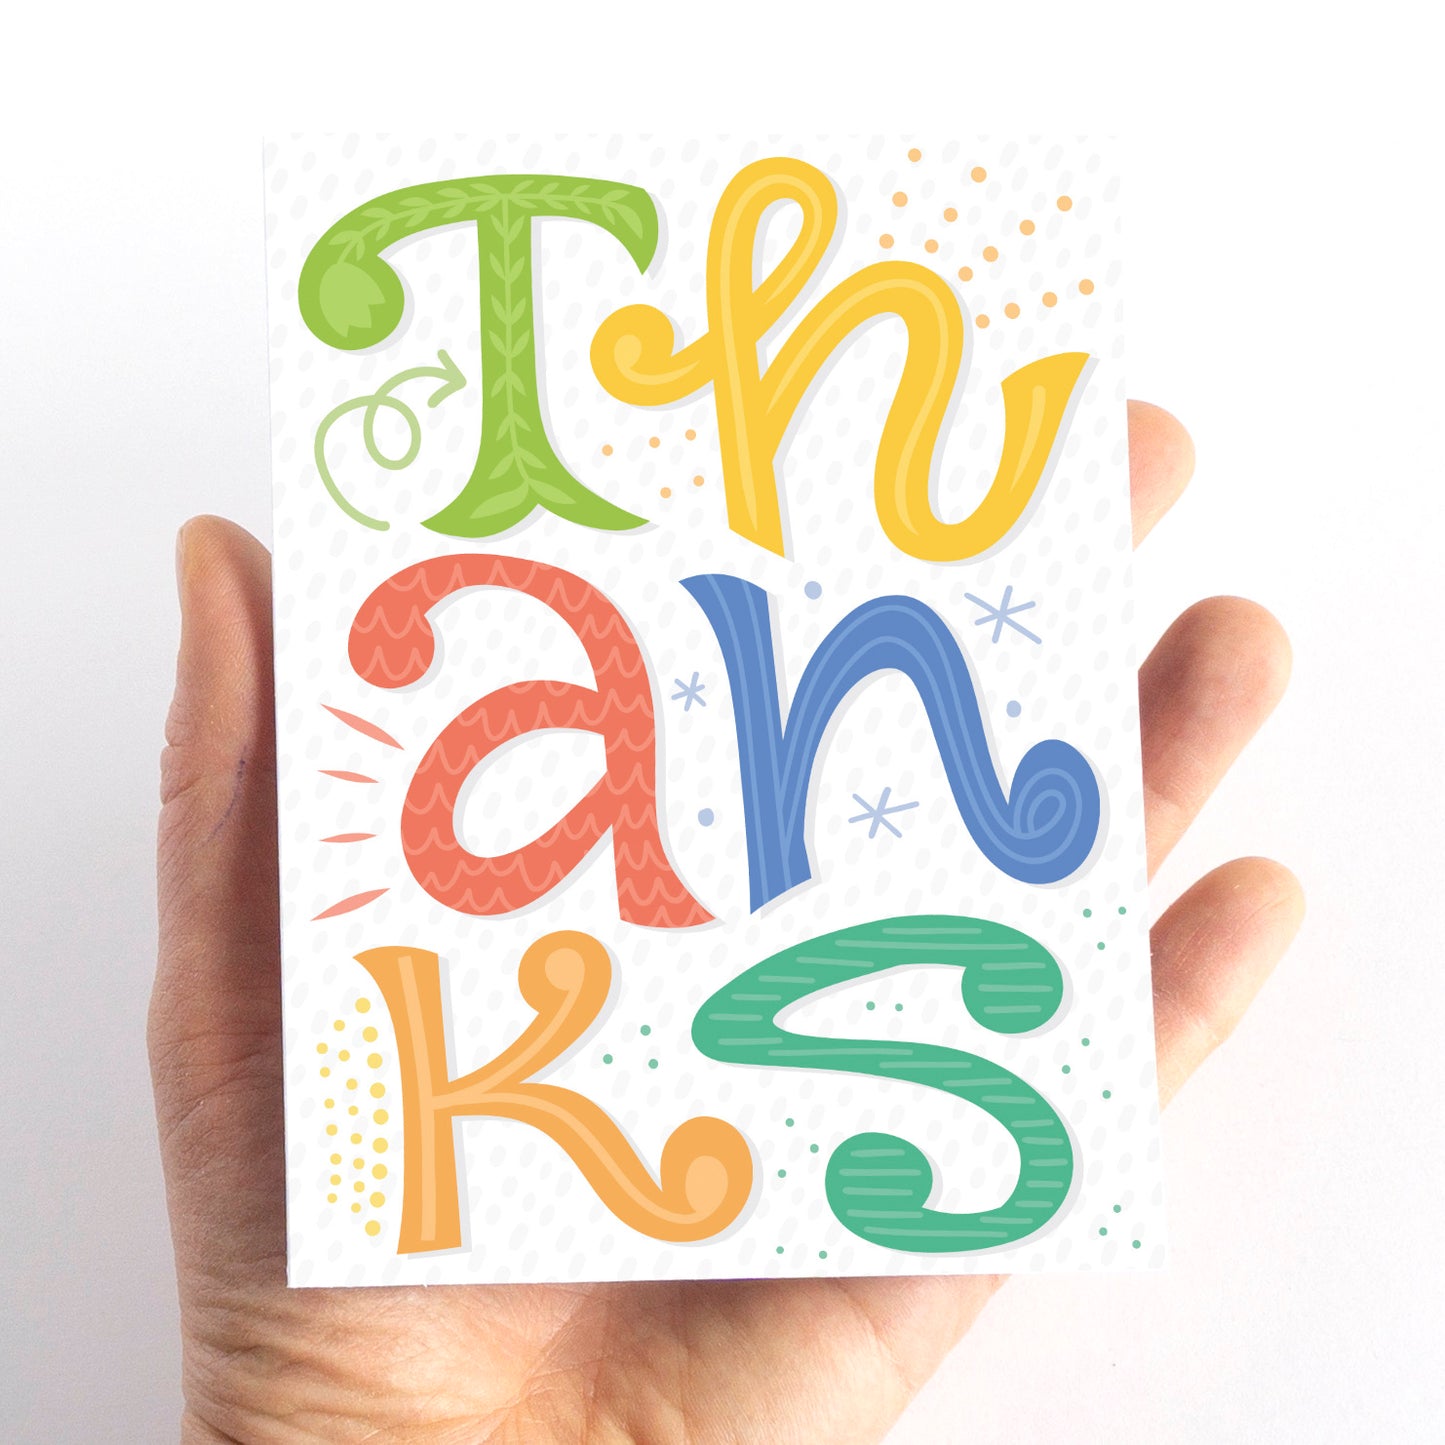 Thanks Thank You Card